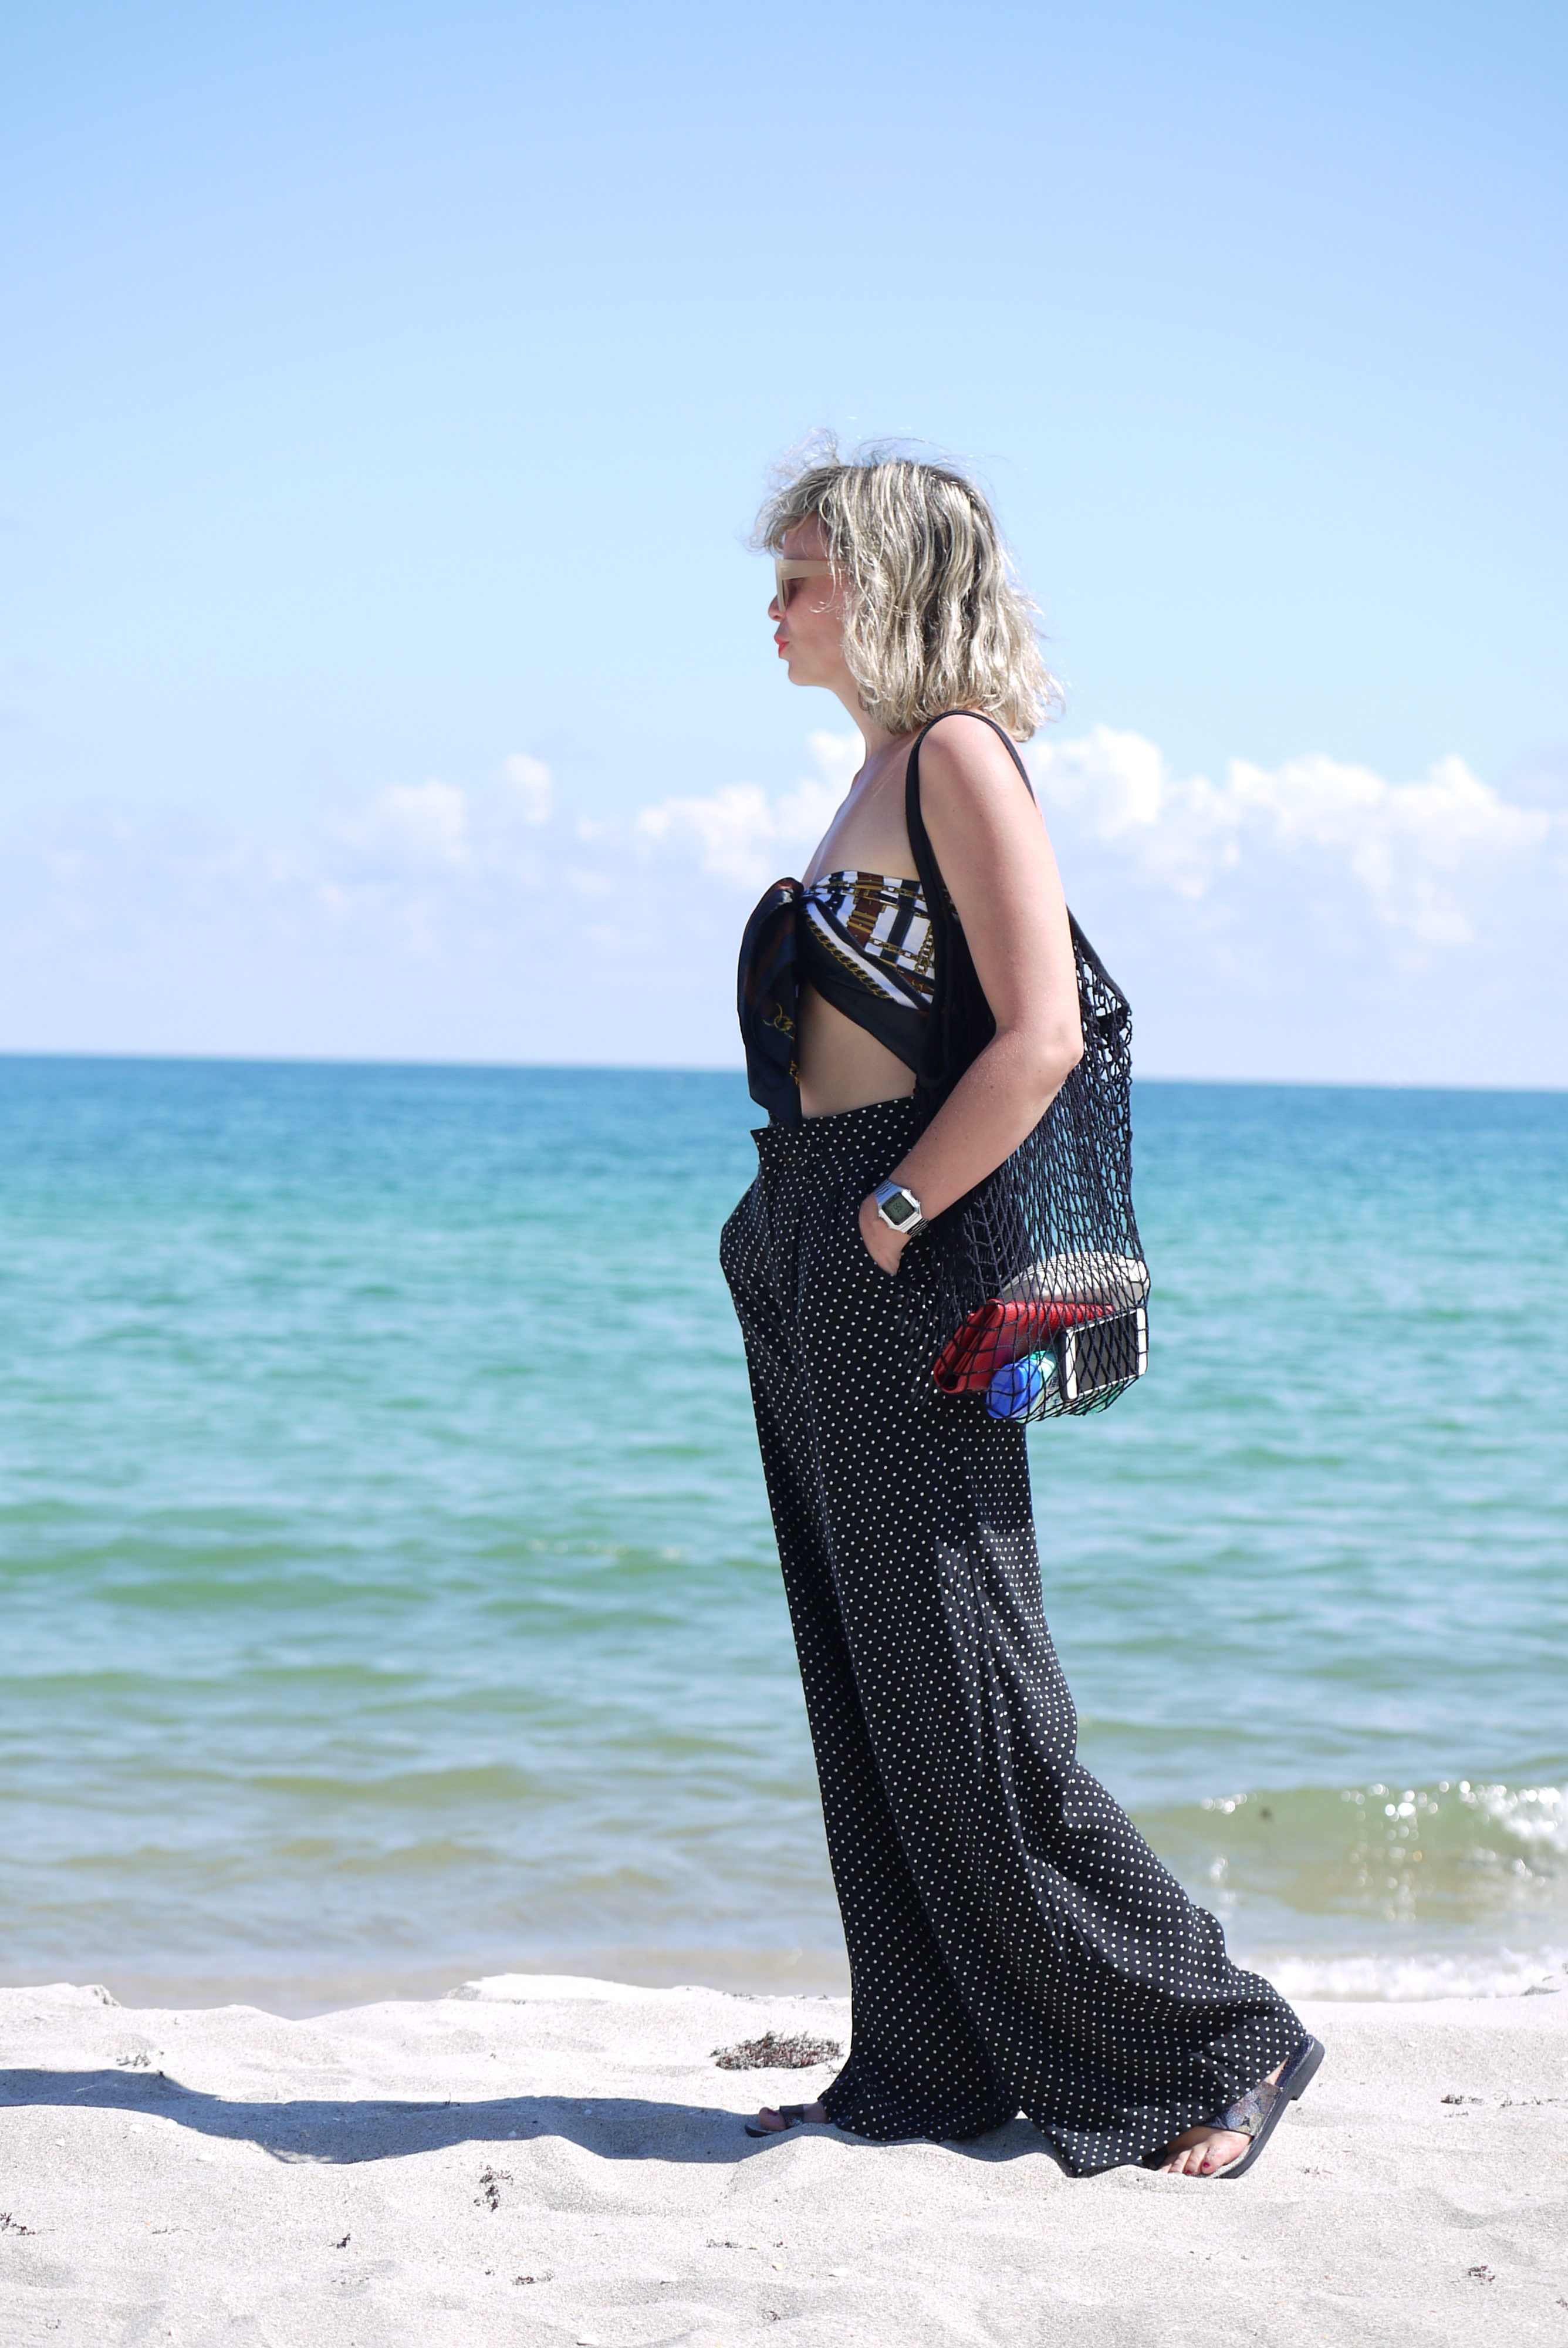 Alba Marina Otero fashion blogger from Mylovelypeople blog shares with you what to wear in a birthday party at the beach, she is wearing a high waist polka dots pants, a scarf as a top and a pairs of flat greek sandals